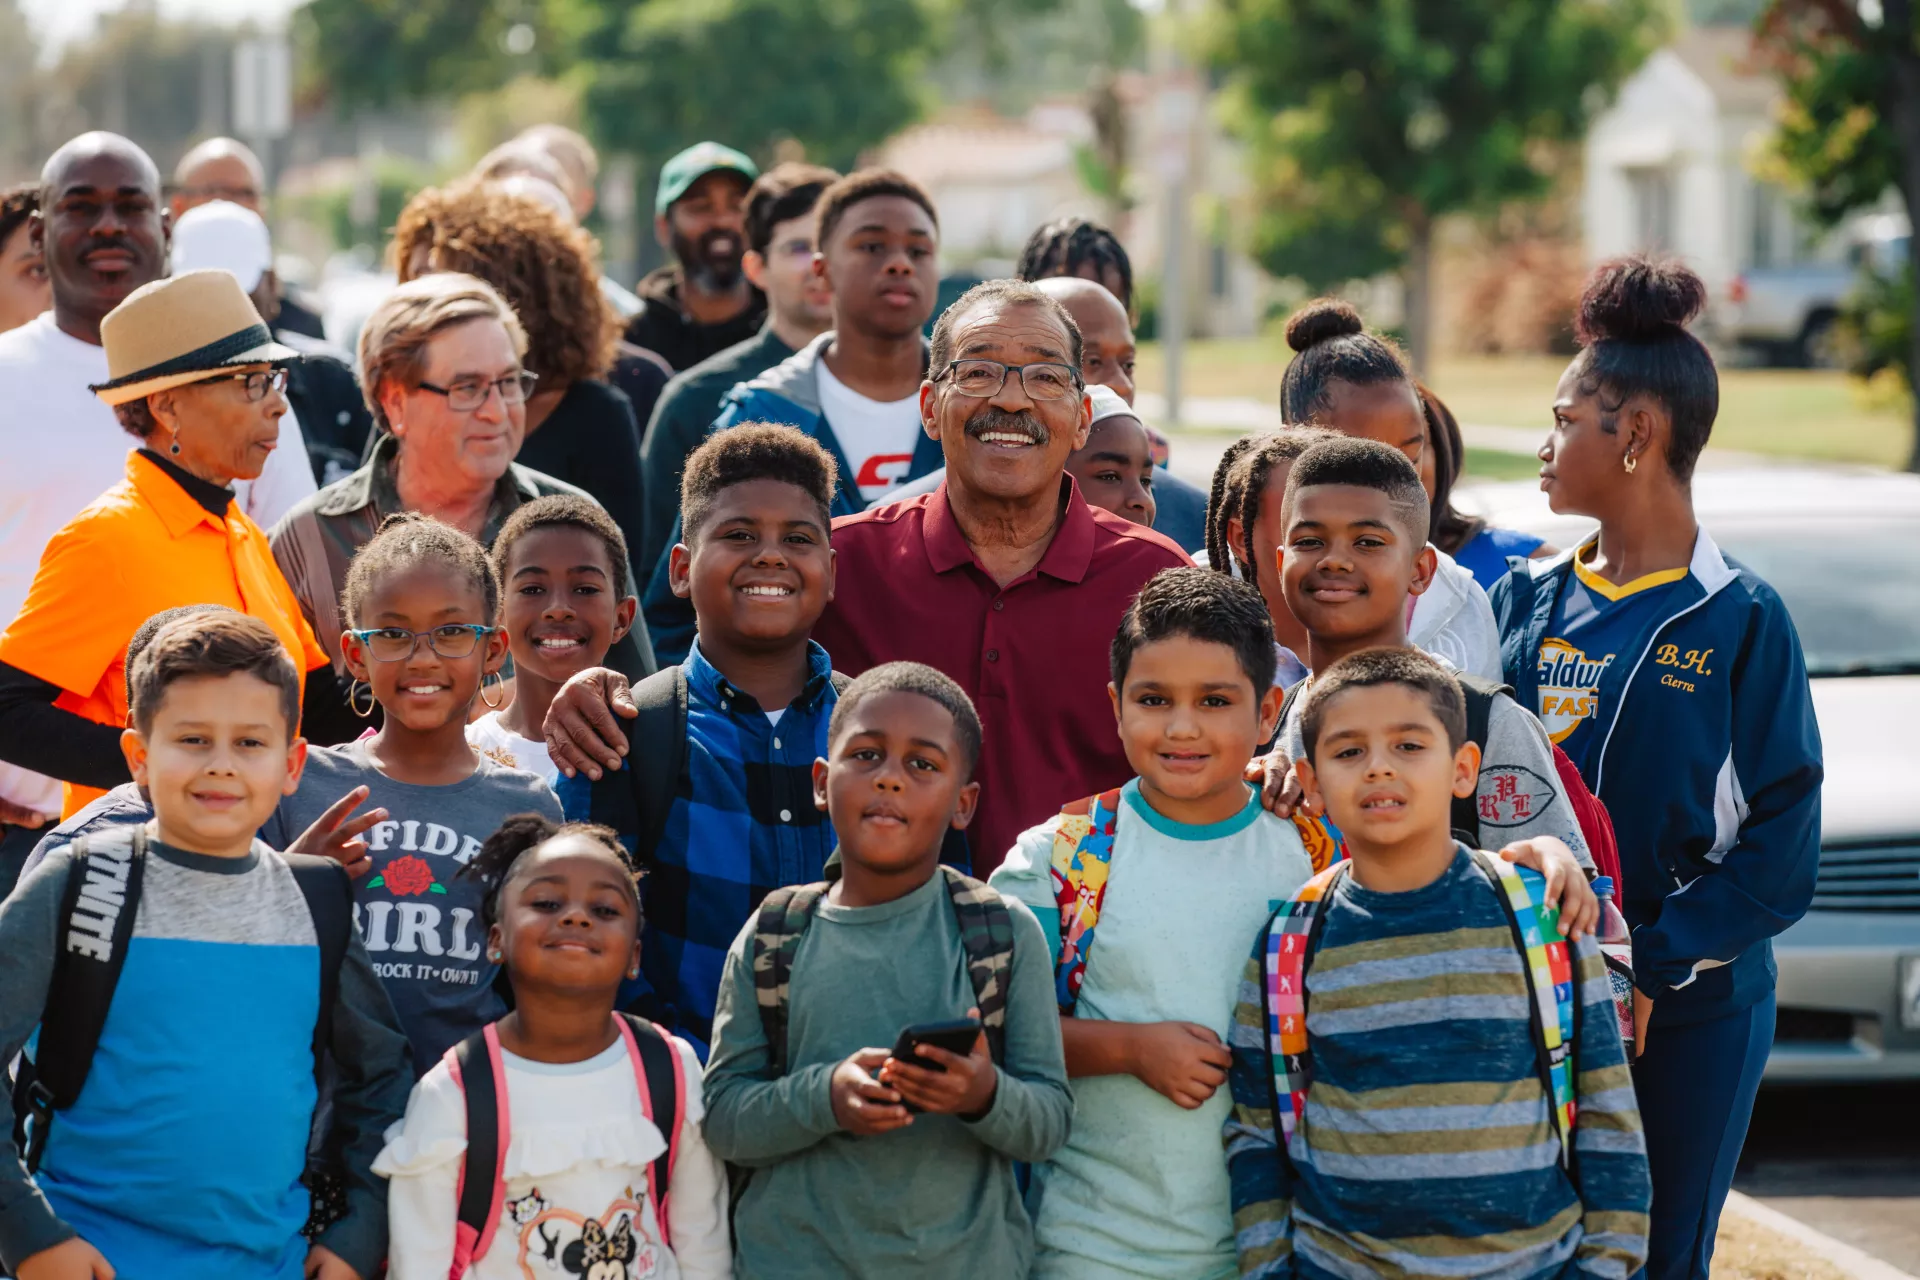 Herb Wesson Group Photo with Children